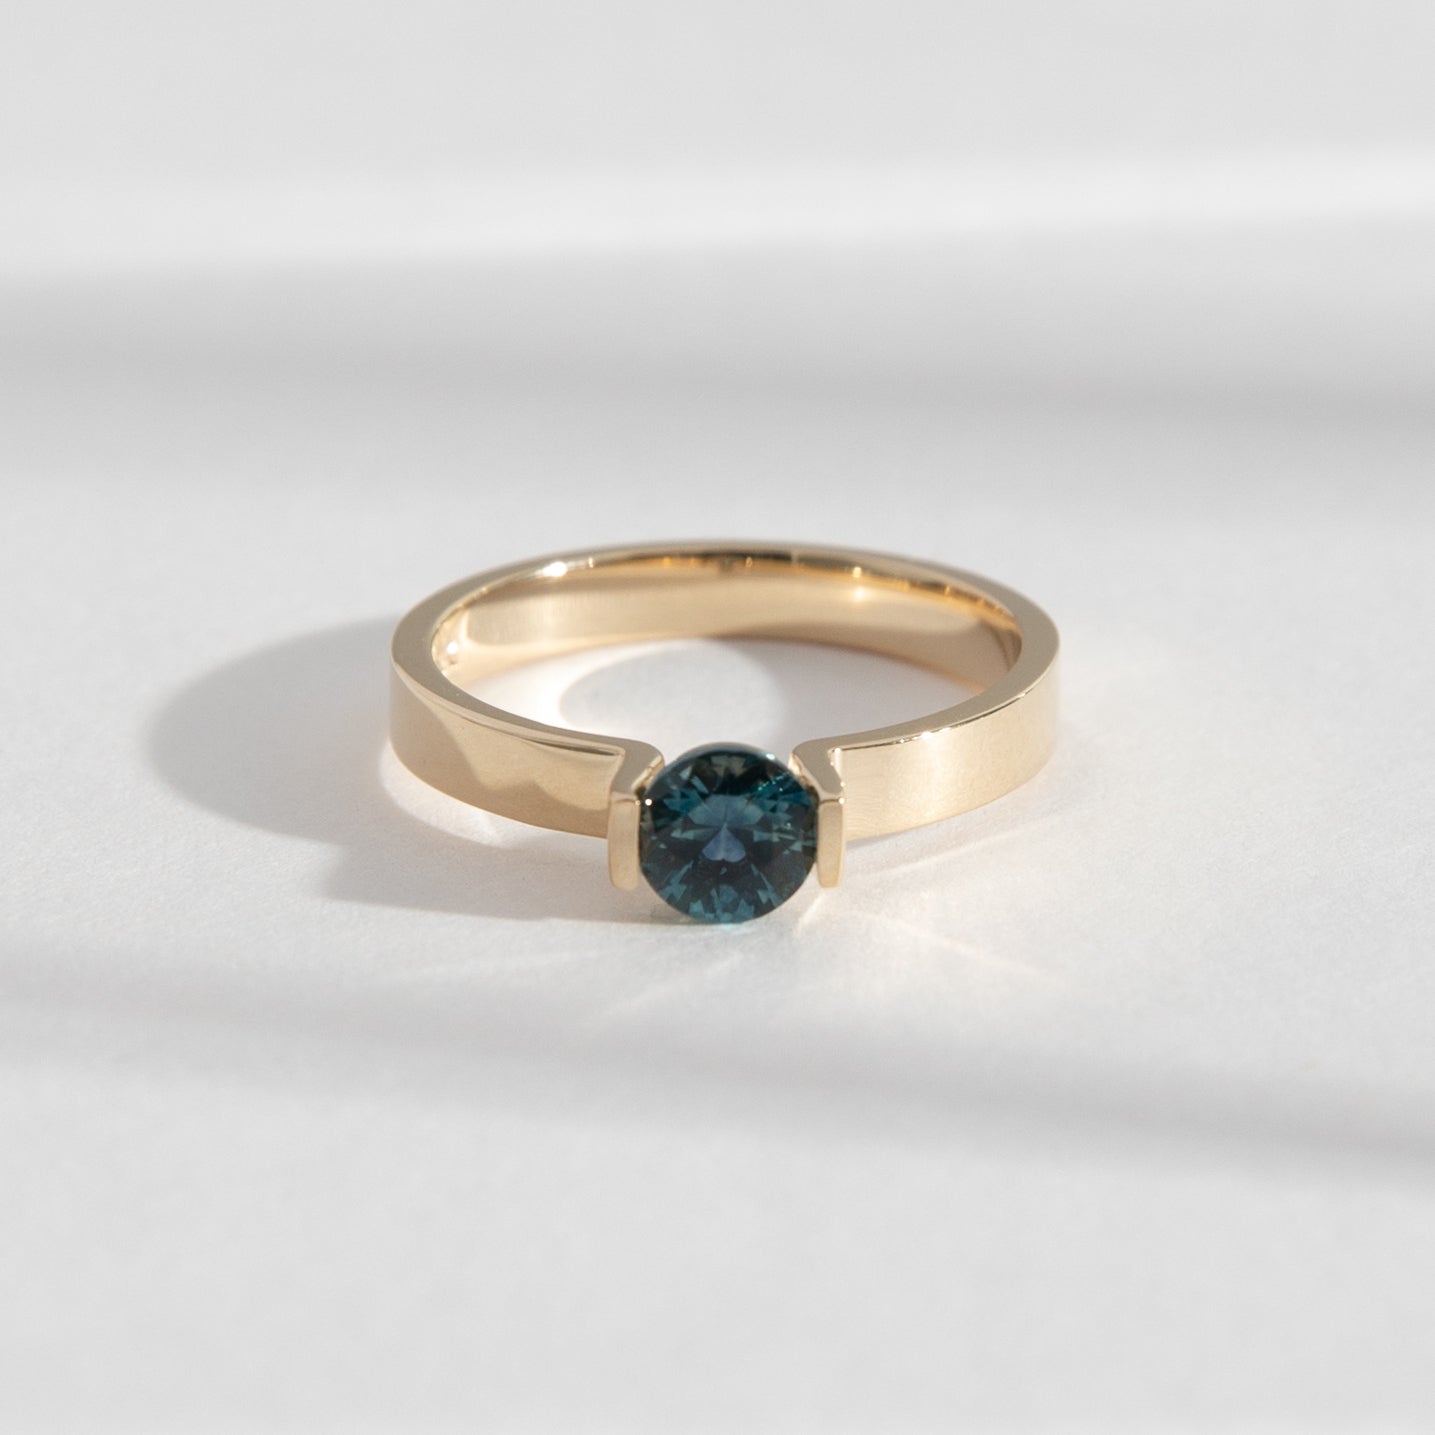 Lara Minimal Ring in 14k Gold set with a 0.59ct round brilliant cut dark teal sapphire By SHW Fine Jewelry NYC